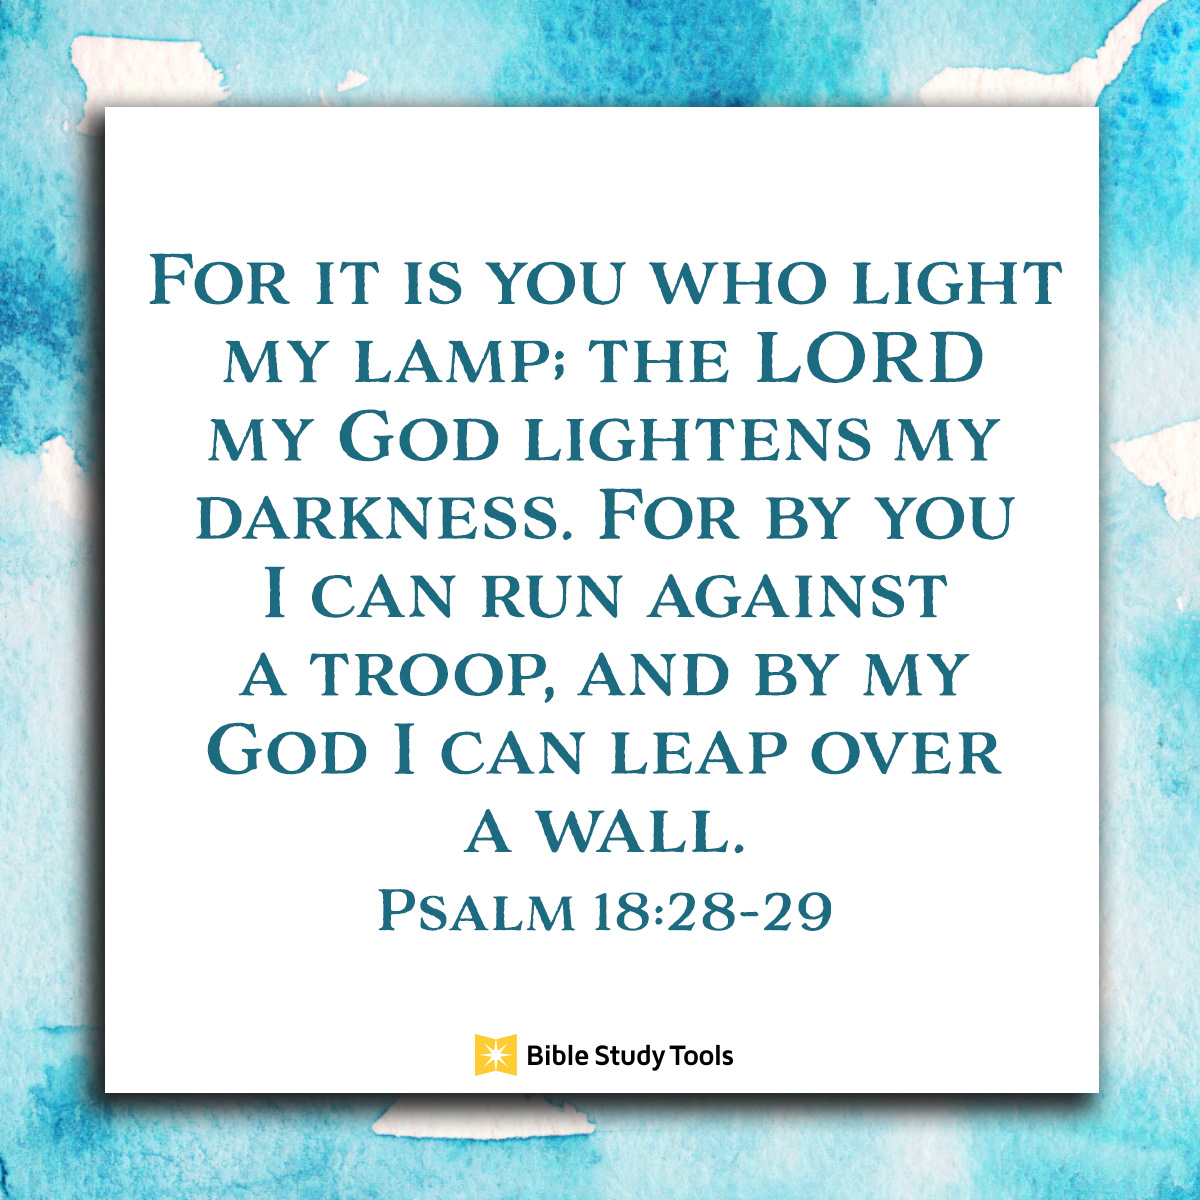 Not Our Strength, But the Lord's (Psalm 18:28-29) - Your Daily Bible Verse  - October 31 - Your Daily Bible Verse